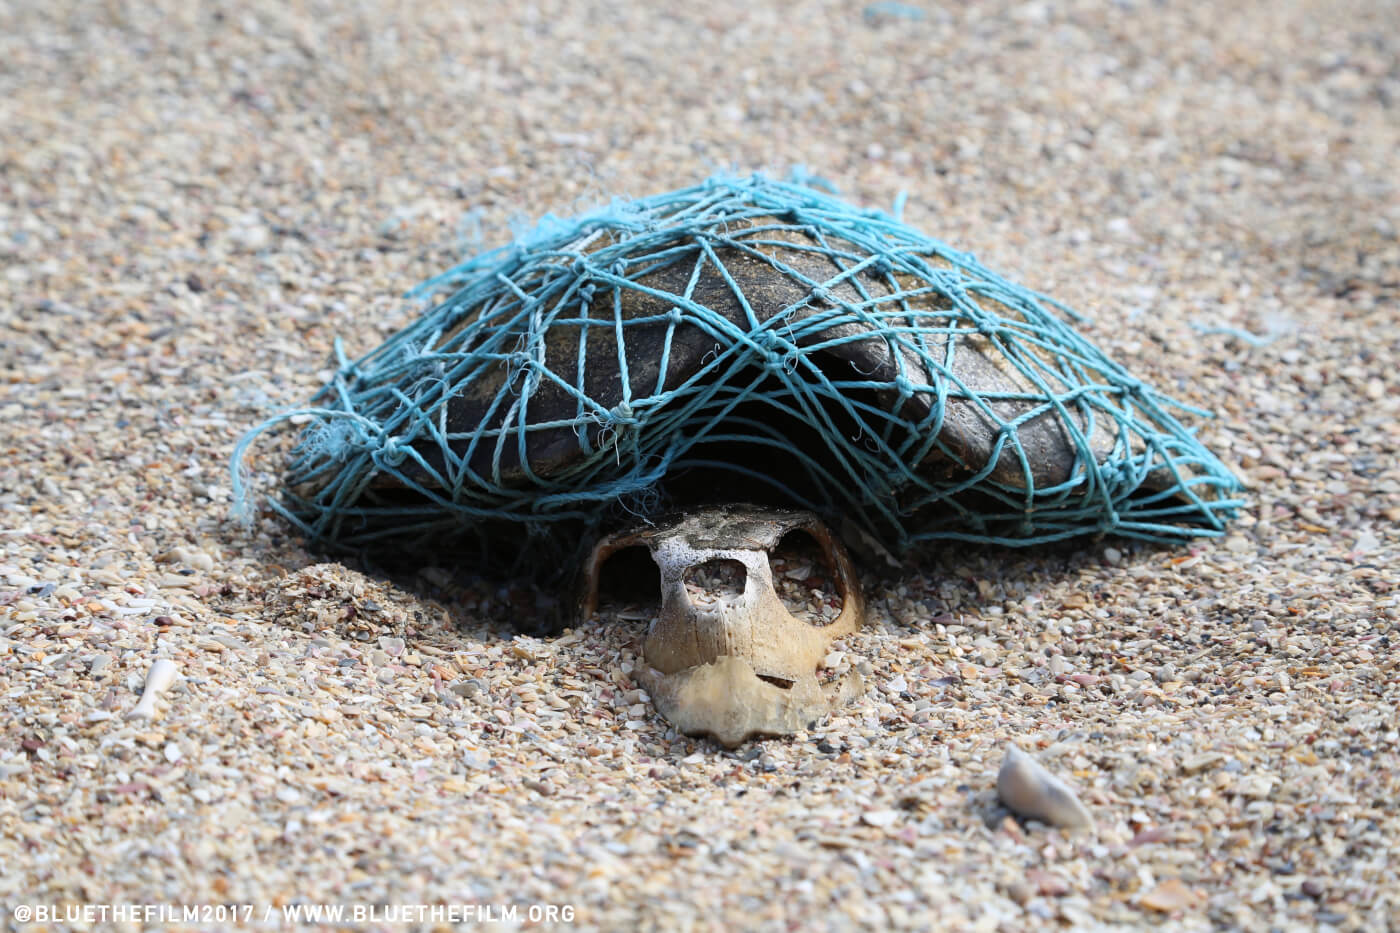 Dead Turtle Still Wrapped in Fishing Net That Likely Killed Him